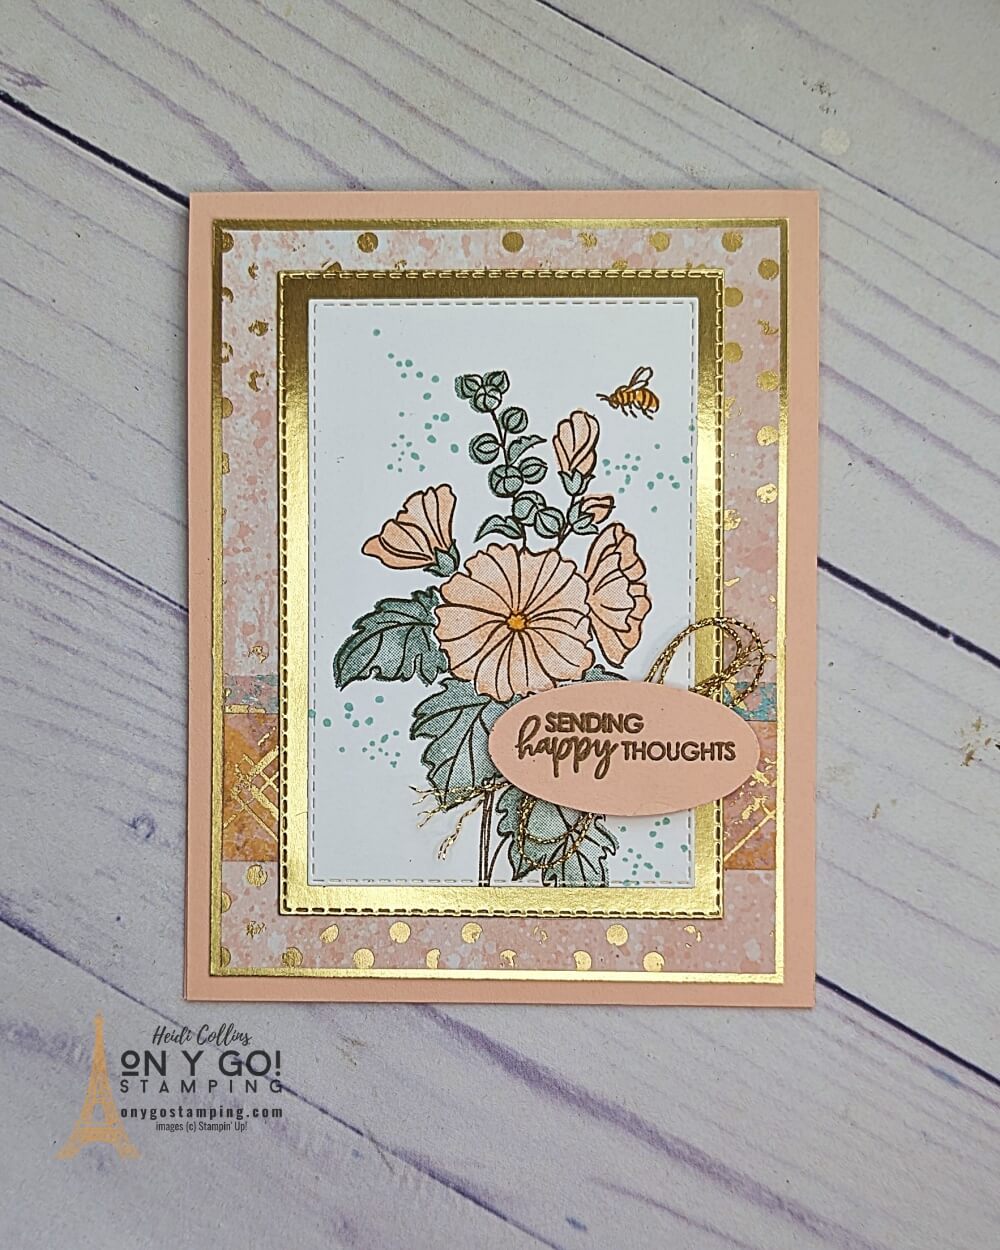 Elegant handmade card with the Texture Chic patterned paper and the Beautifully Happy stamp set from Stampin' Up!® During Sale-A-Bration 2023, get these stamps for free with a qualifying purchase.